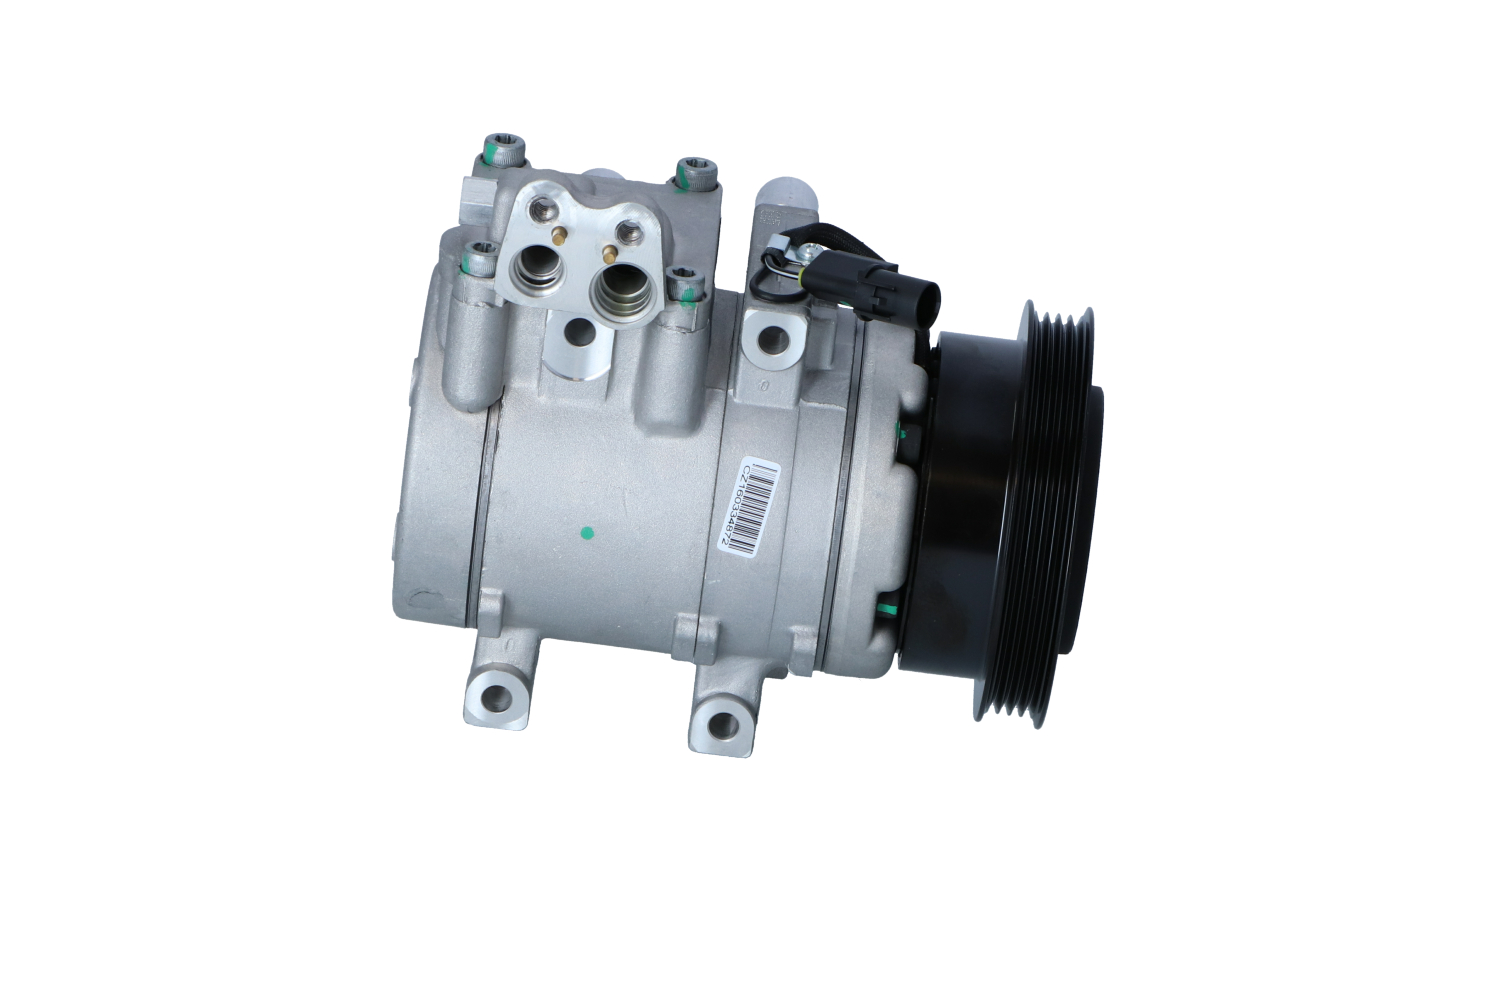 NRF 32205 Air conditioning compressor HS15, 12V, PAG 46, with PAG compressor oil, with seal ring